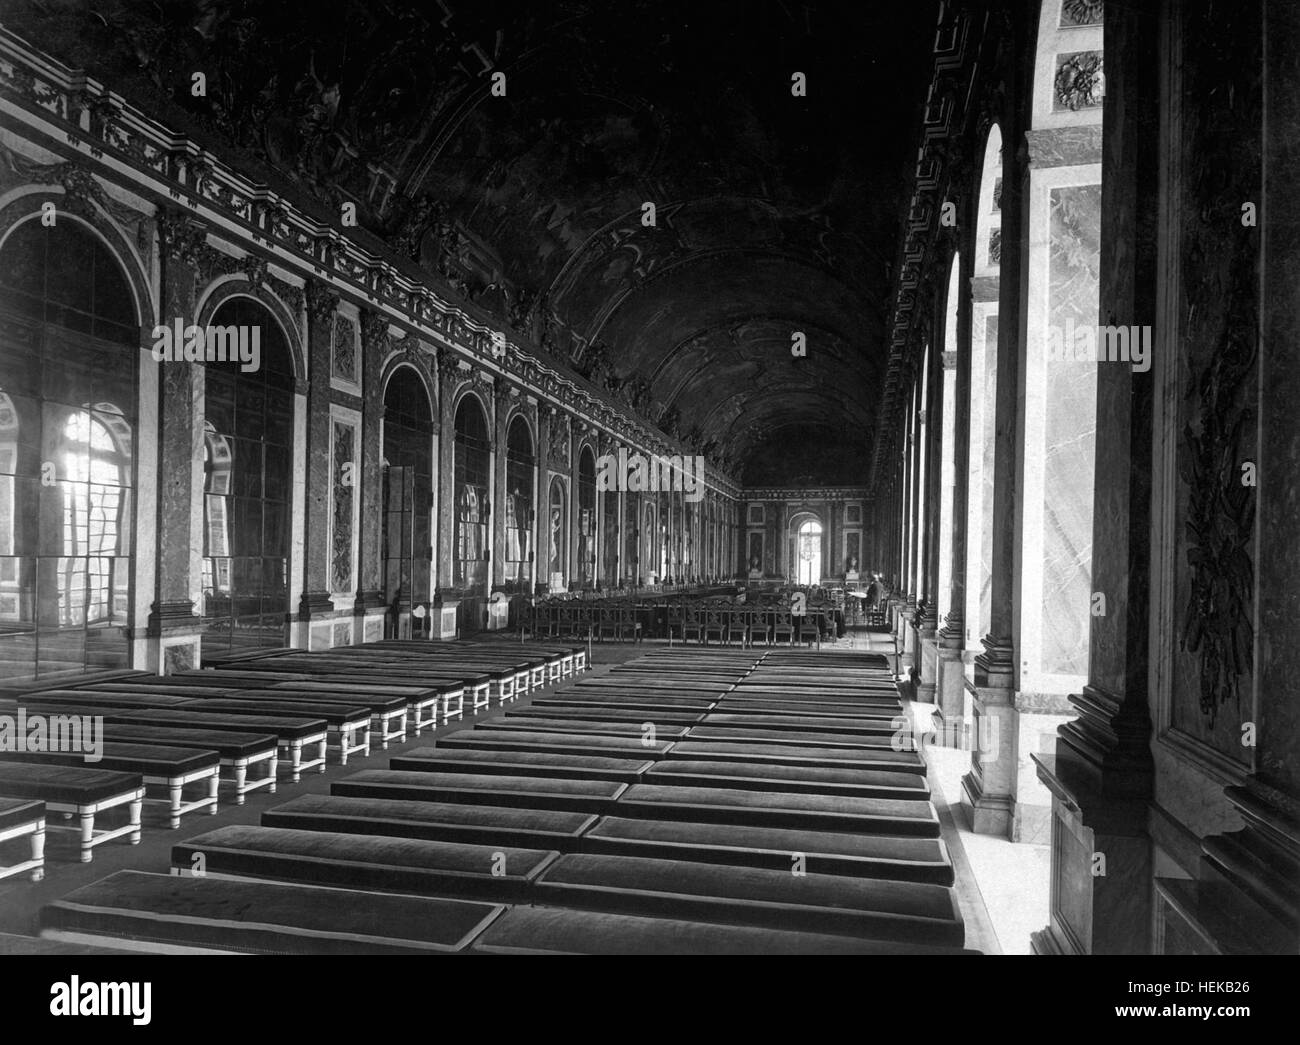 Interior of the Galerie des Glaces showing the arrangement of tables for the signing of Peace Terms, Versailles, France.  June 27, 1919.  Lt. M.S. Lentz.  (Army) NARA FILE #:  111-SC-159294 WAR & CONFLICT BOOK #:  723 Arrangement of tables for signing of Treaty of Versailles 1919-06-27 Stock Photo